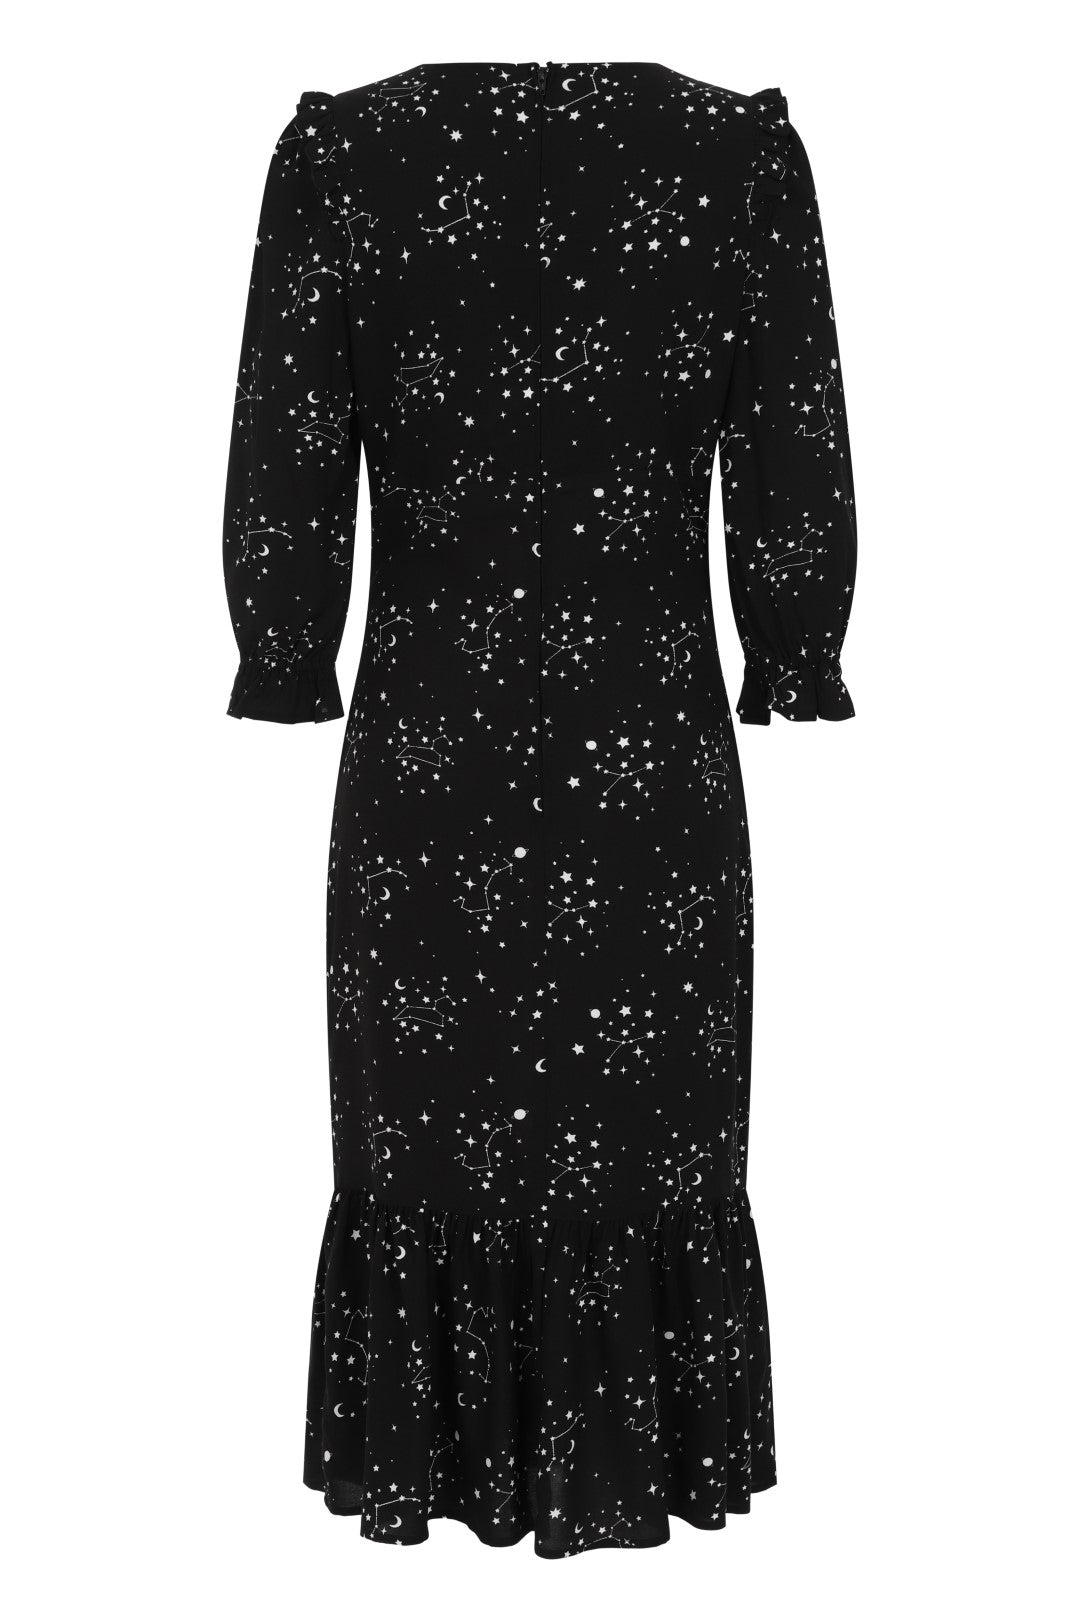 Flat lay of a black mid dress with 3/4 length sleeves and an all over star constellations pattern